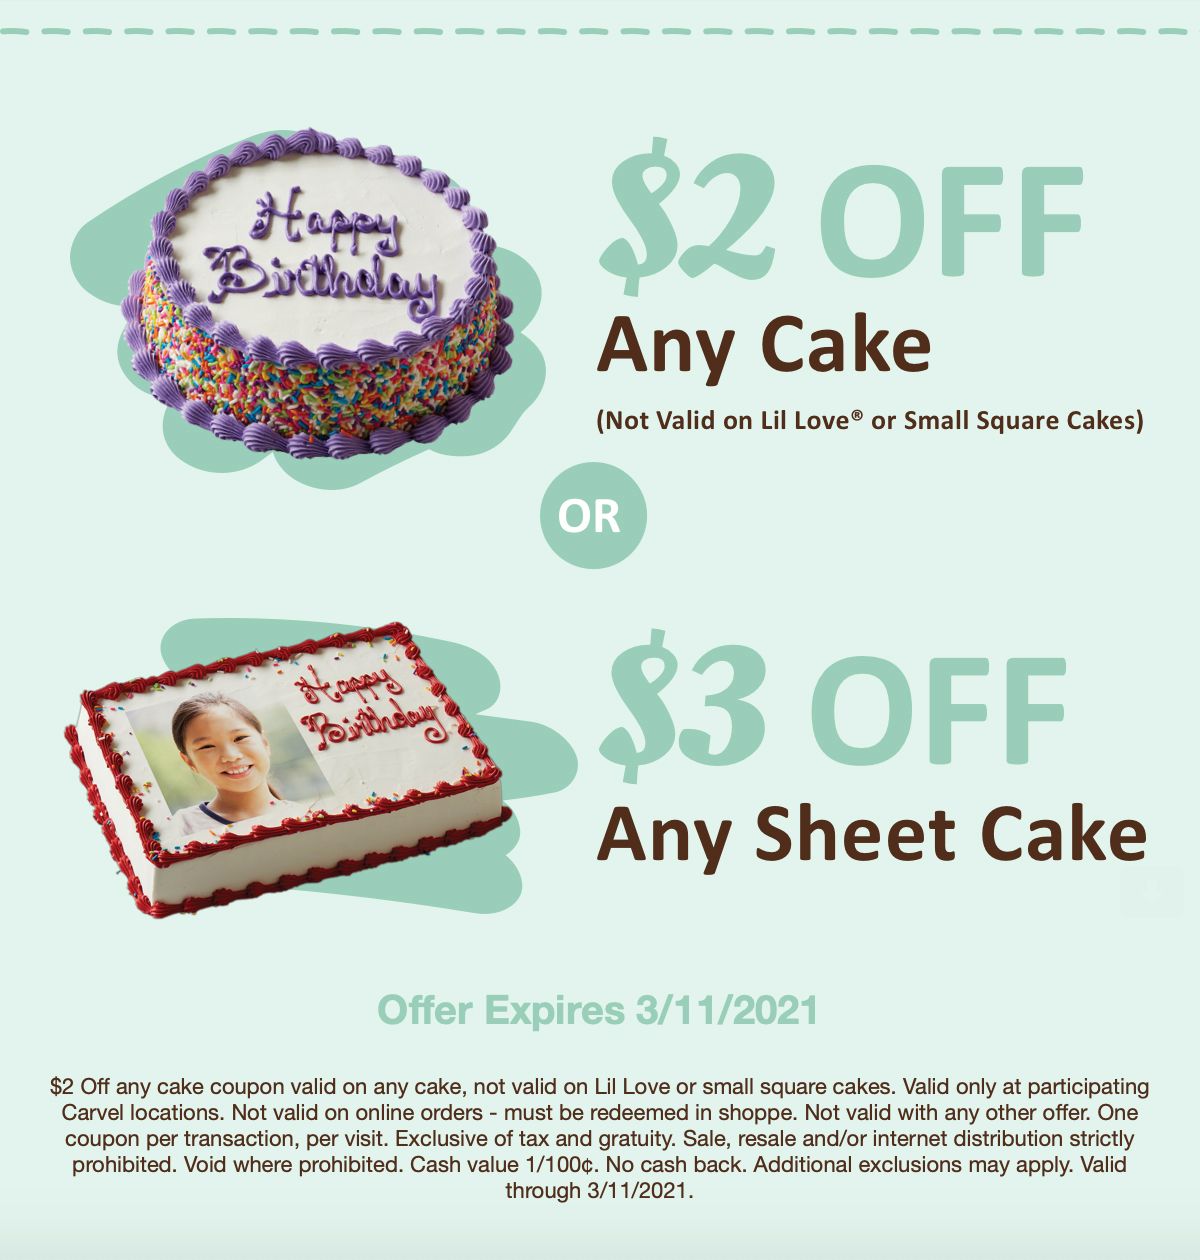 Through to March 11 Enjoy $2 Off a Carvel Cake or $3 Off a Carvel Sheet Cake with a New Coupon